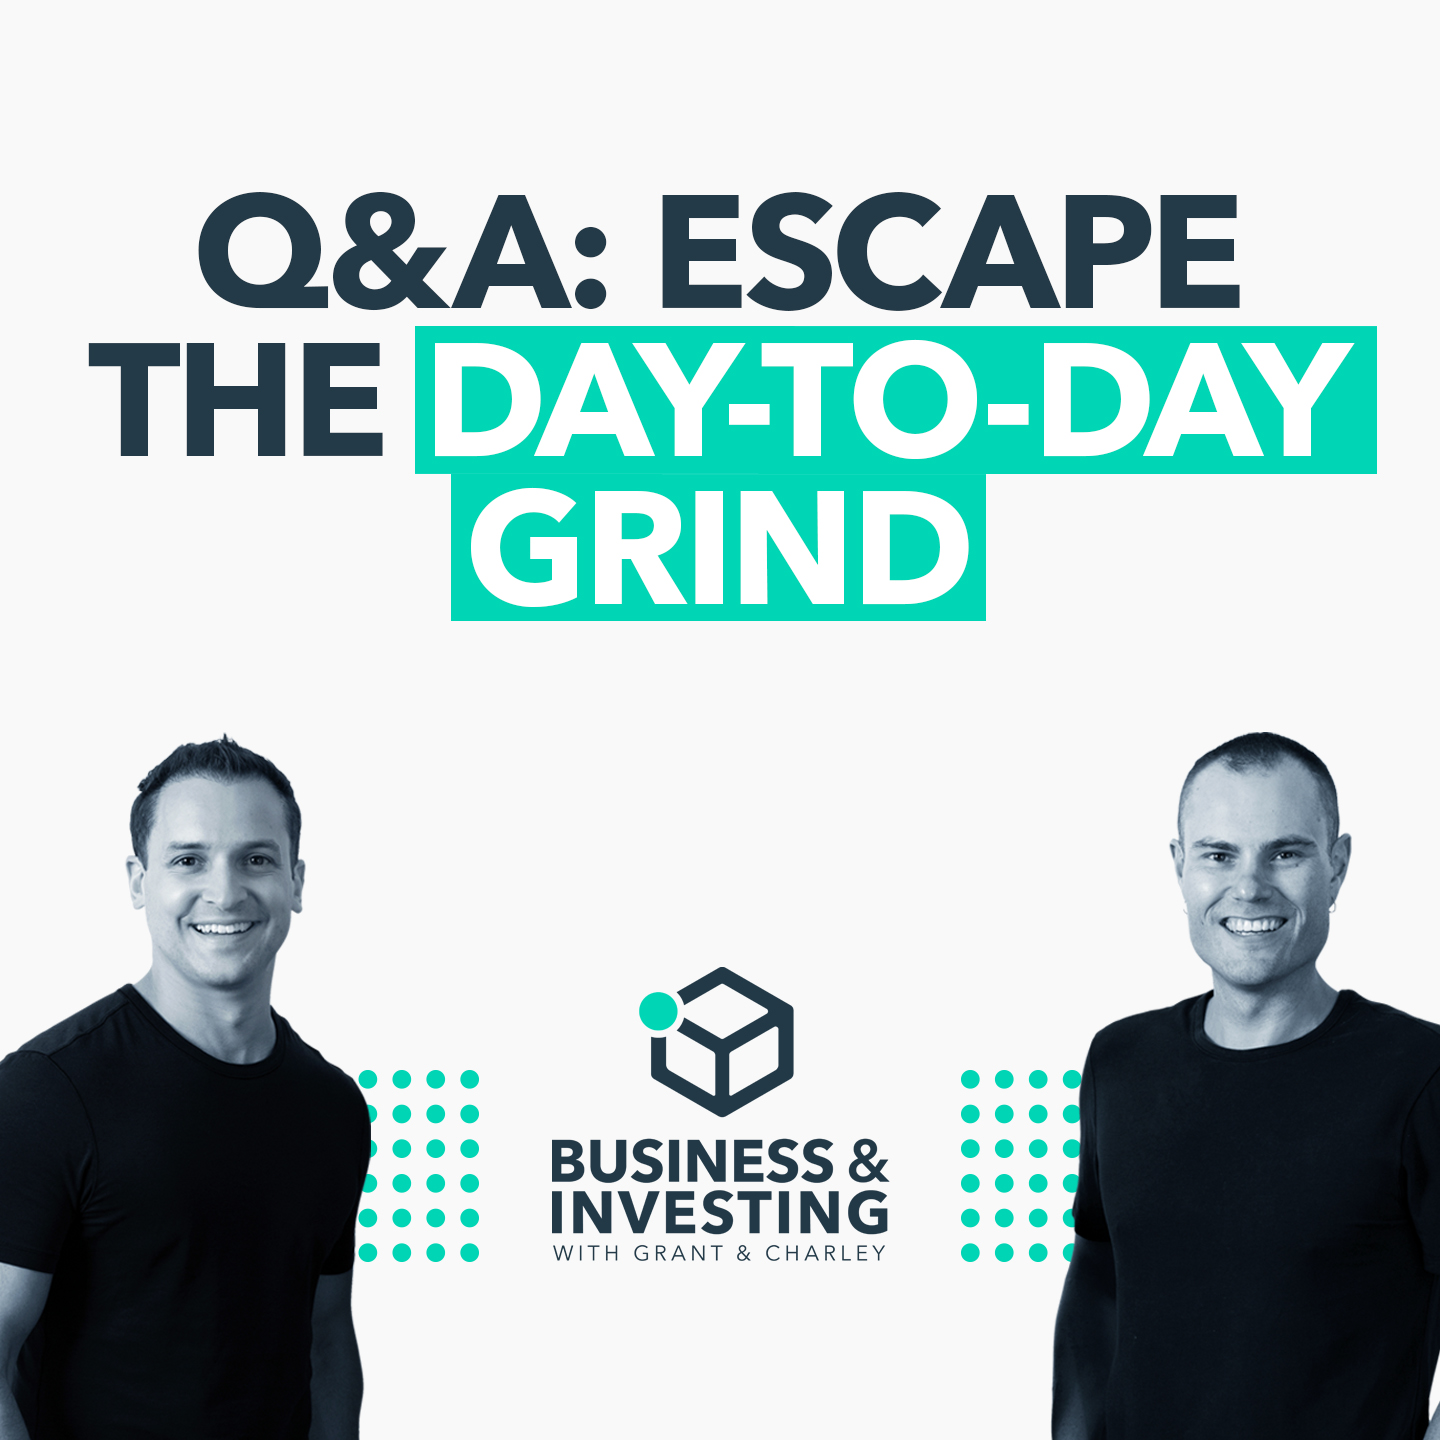 Q&A: Escape the Day-to-Day Grind